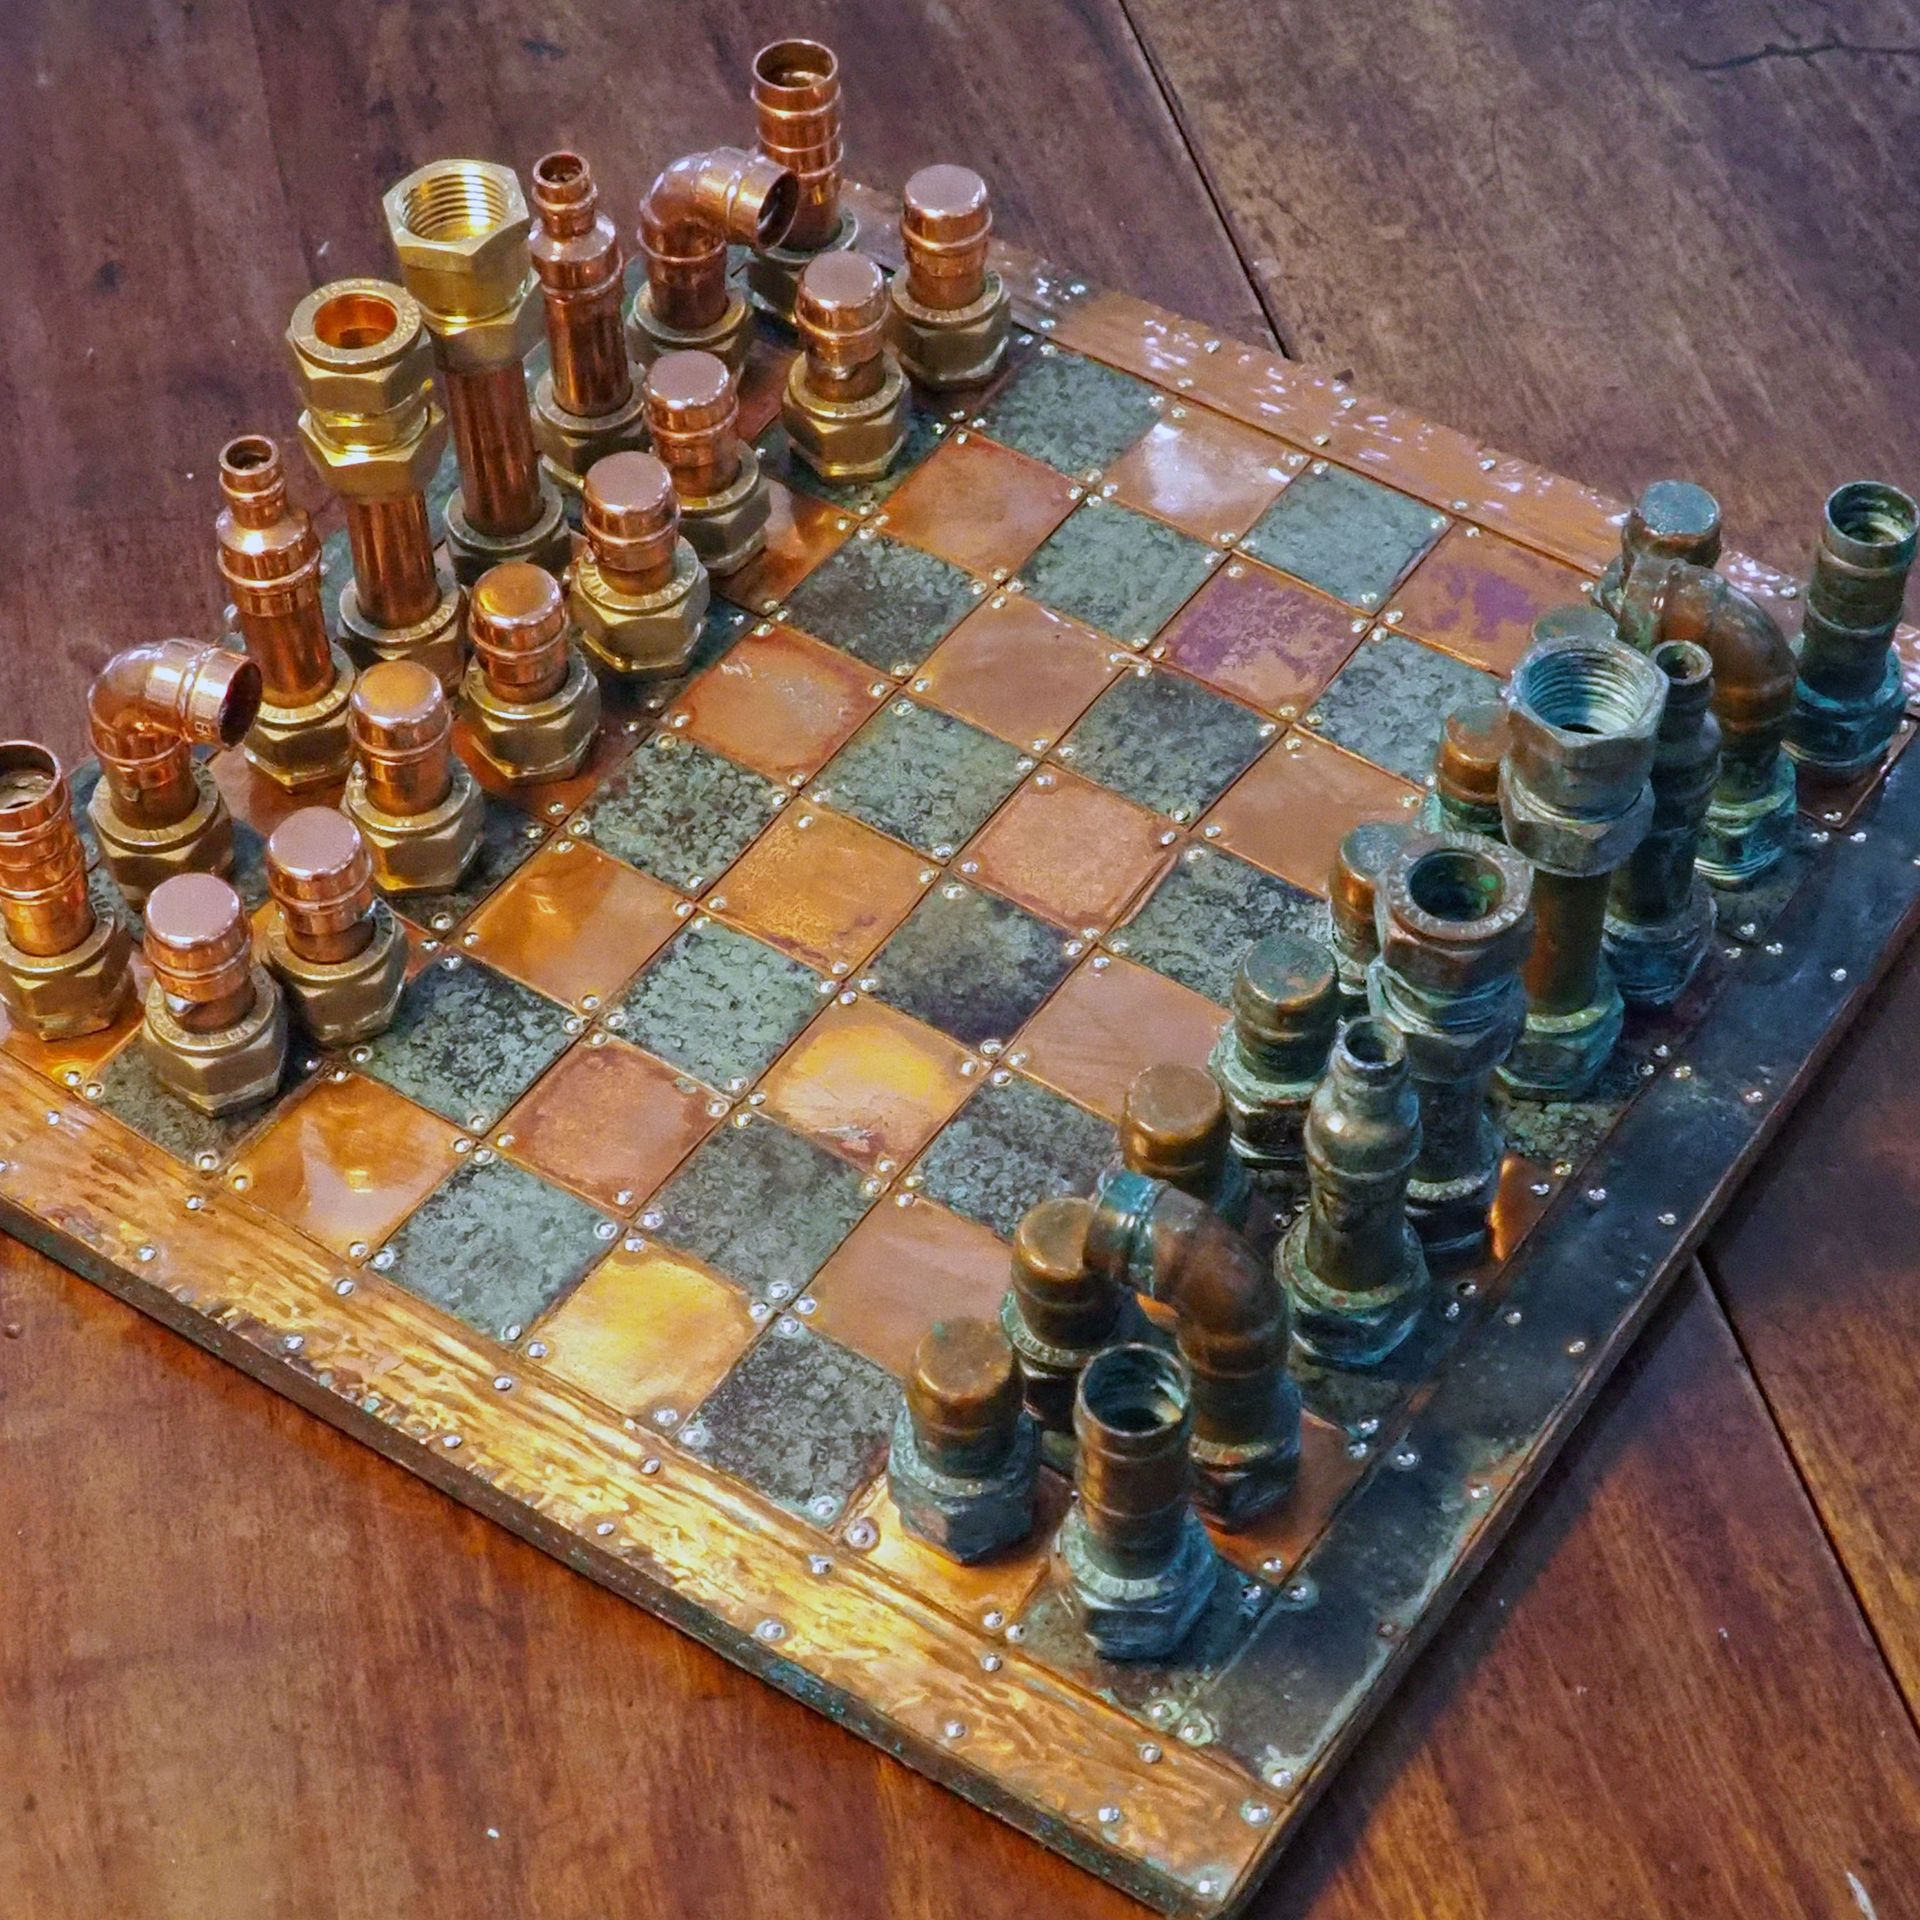 A chess set made from copper. The board is made from shinny and tarnished copper - given the two 'players' their distinct colours. The pieces are made from copper plumbing piping and brass nuts and bolts. 